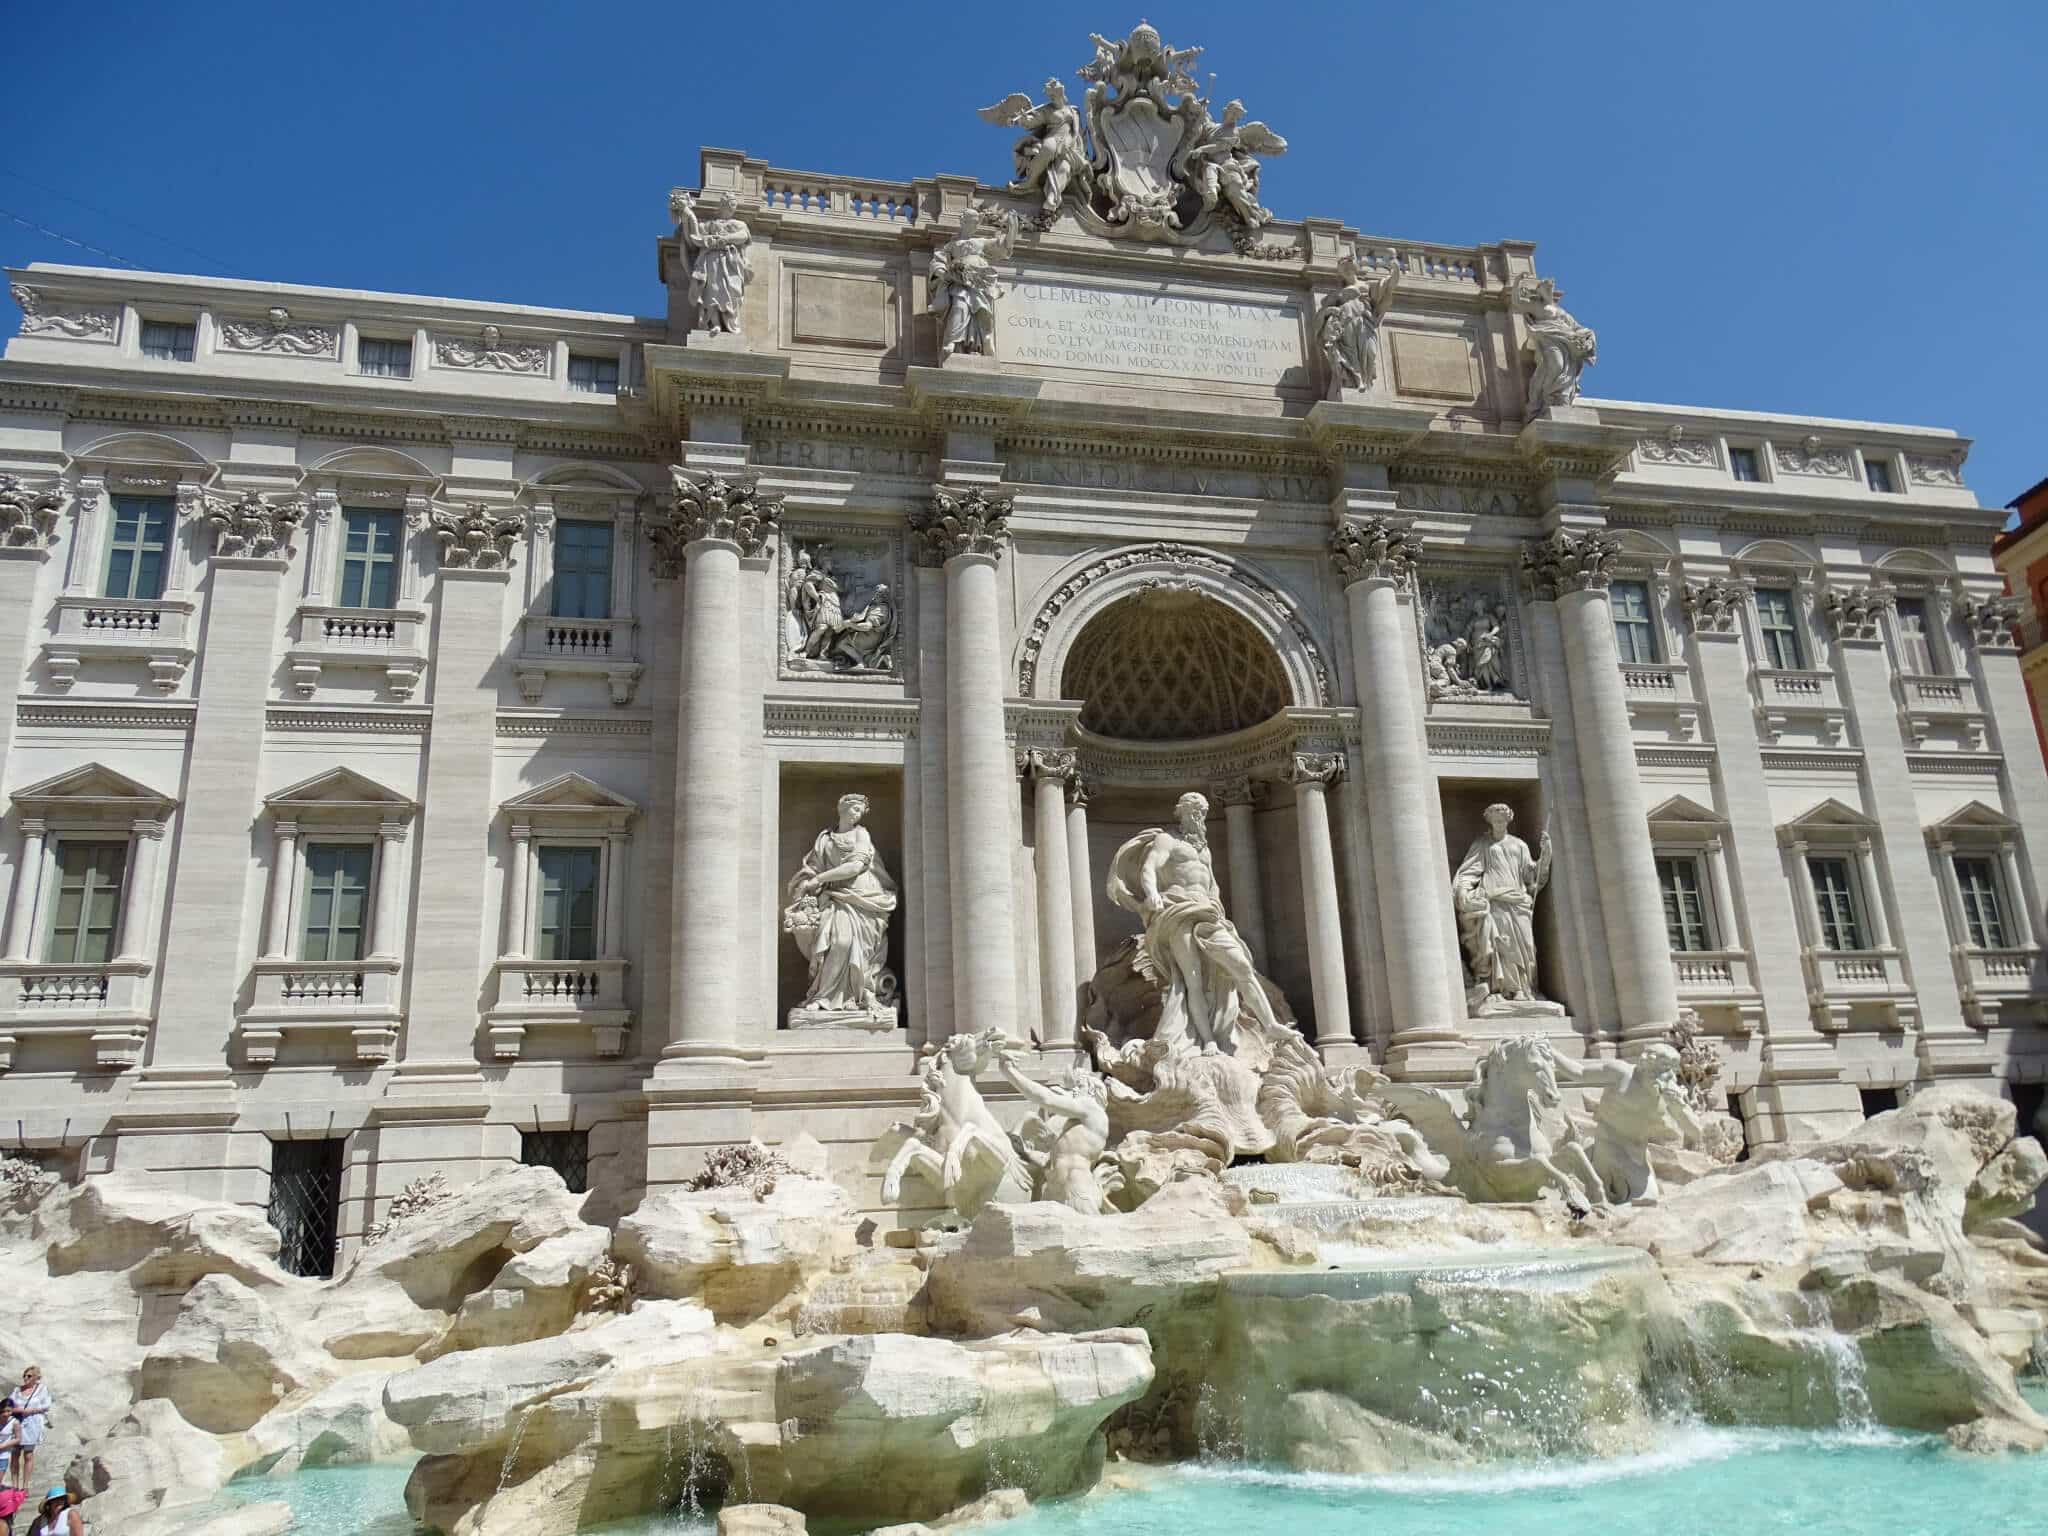 You can't miss the Trevi Fountain while you are doing things in Rome.